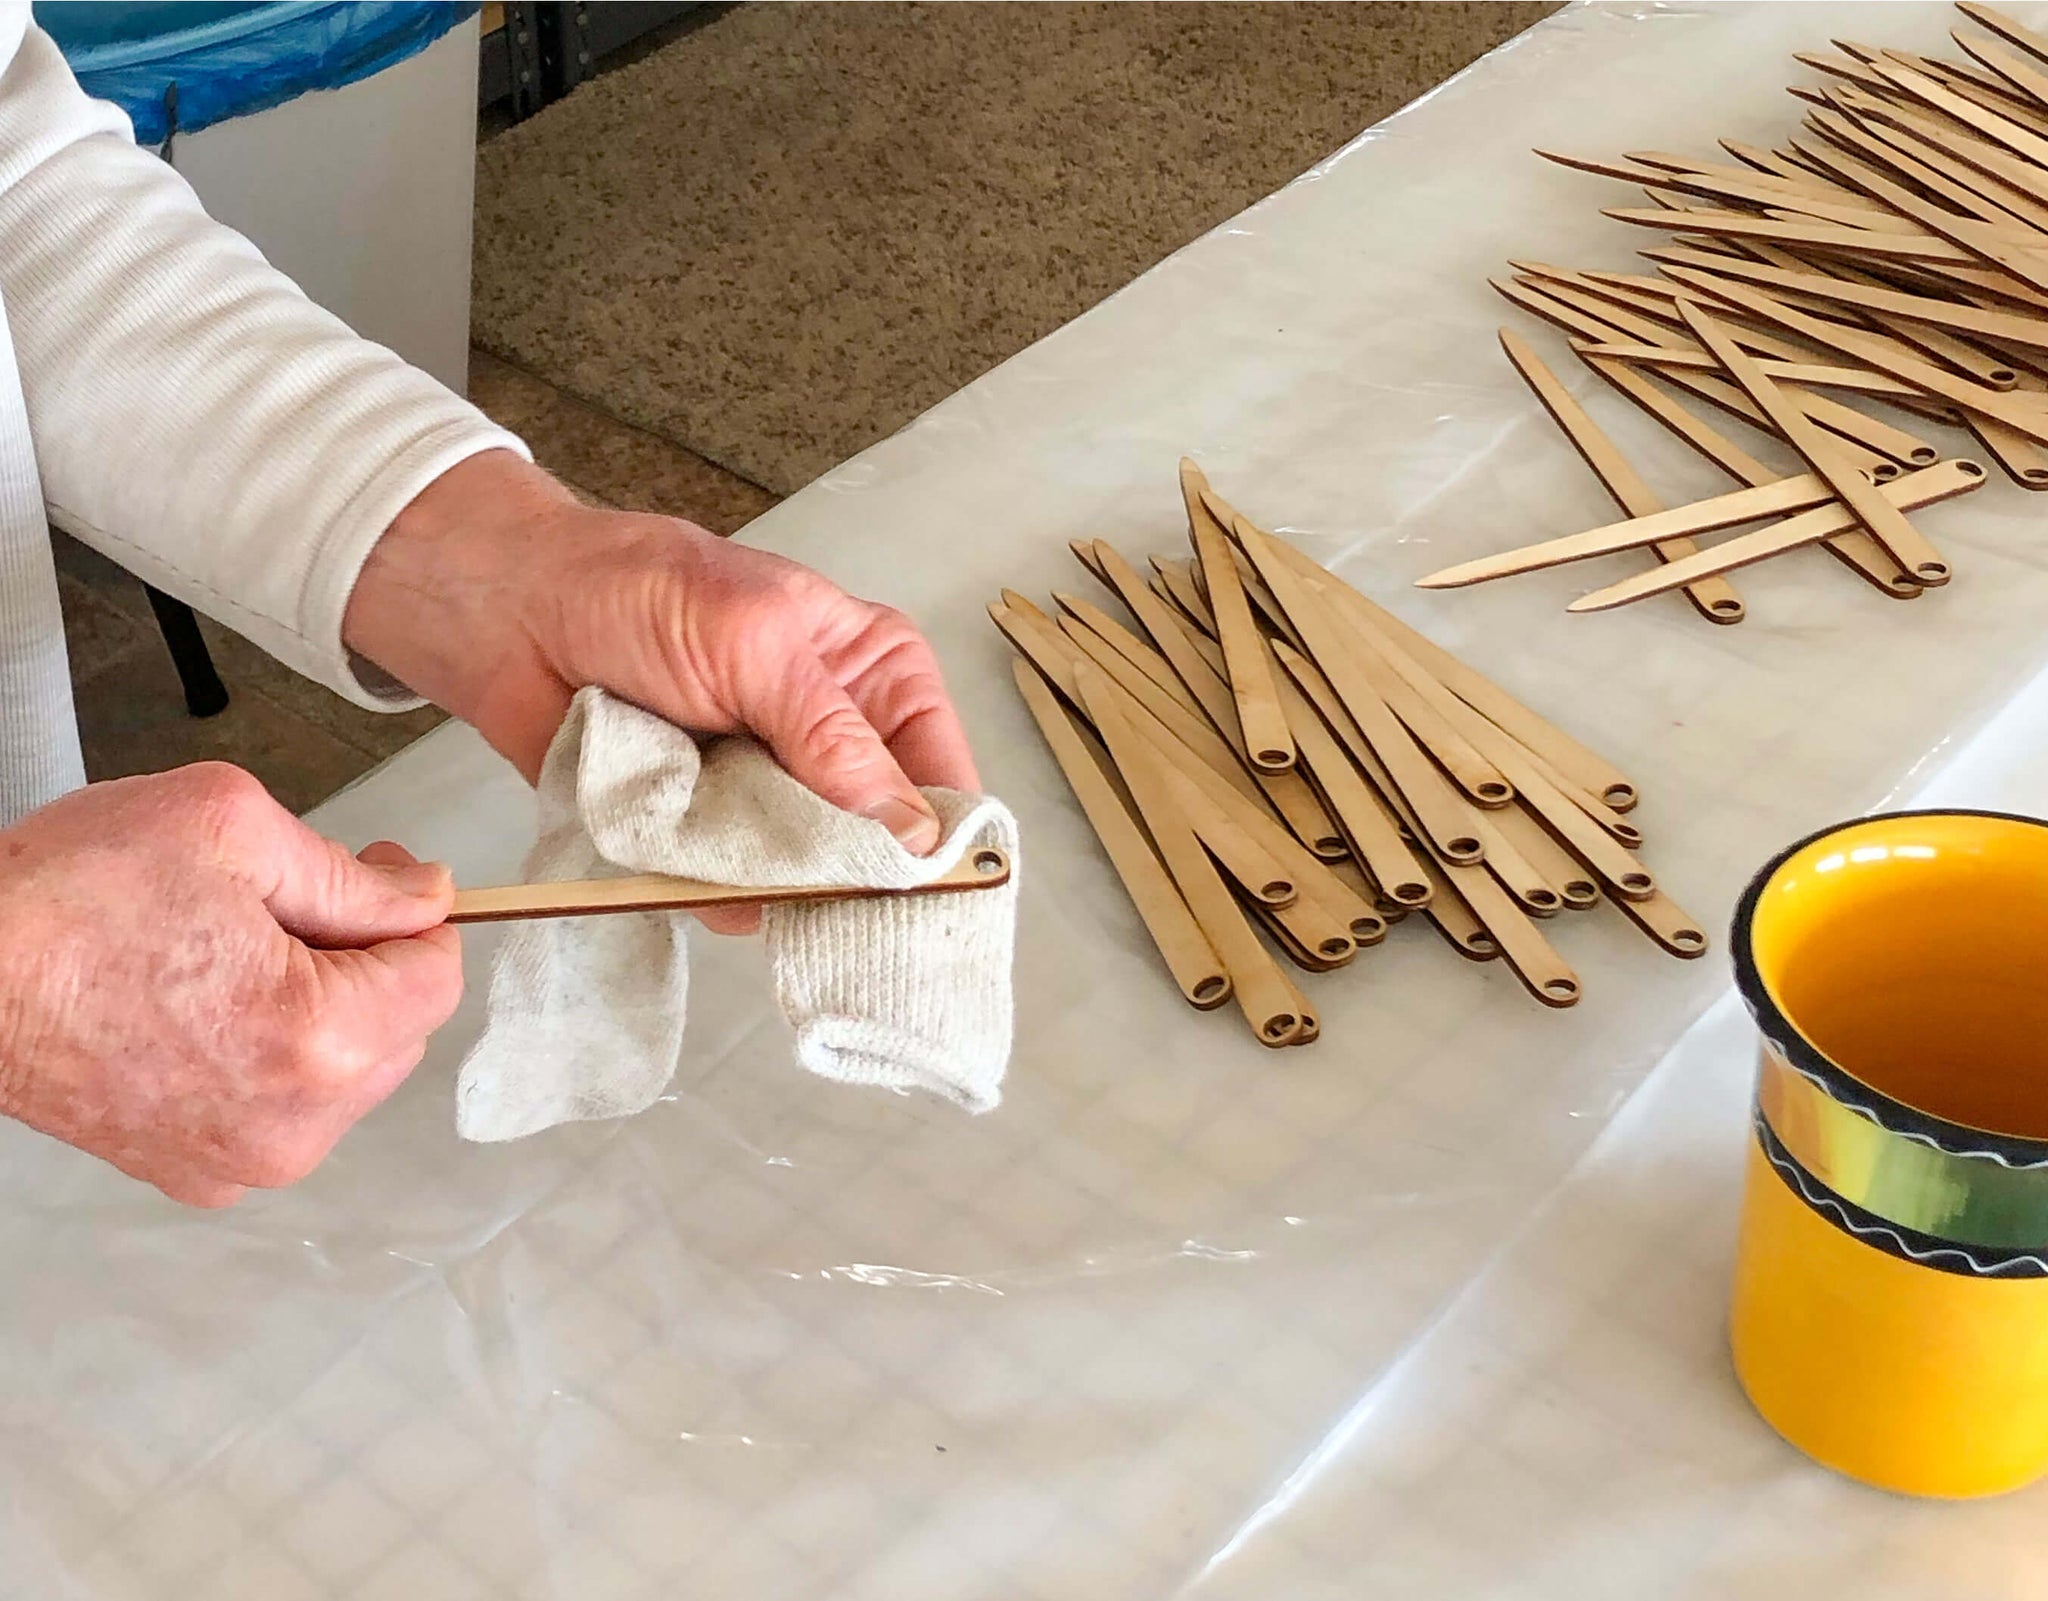 waxing the wooden needles